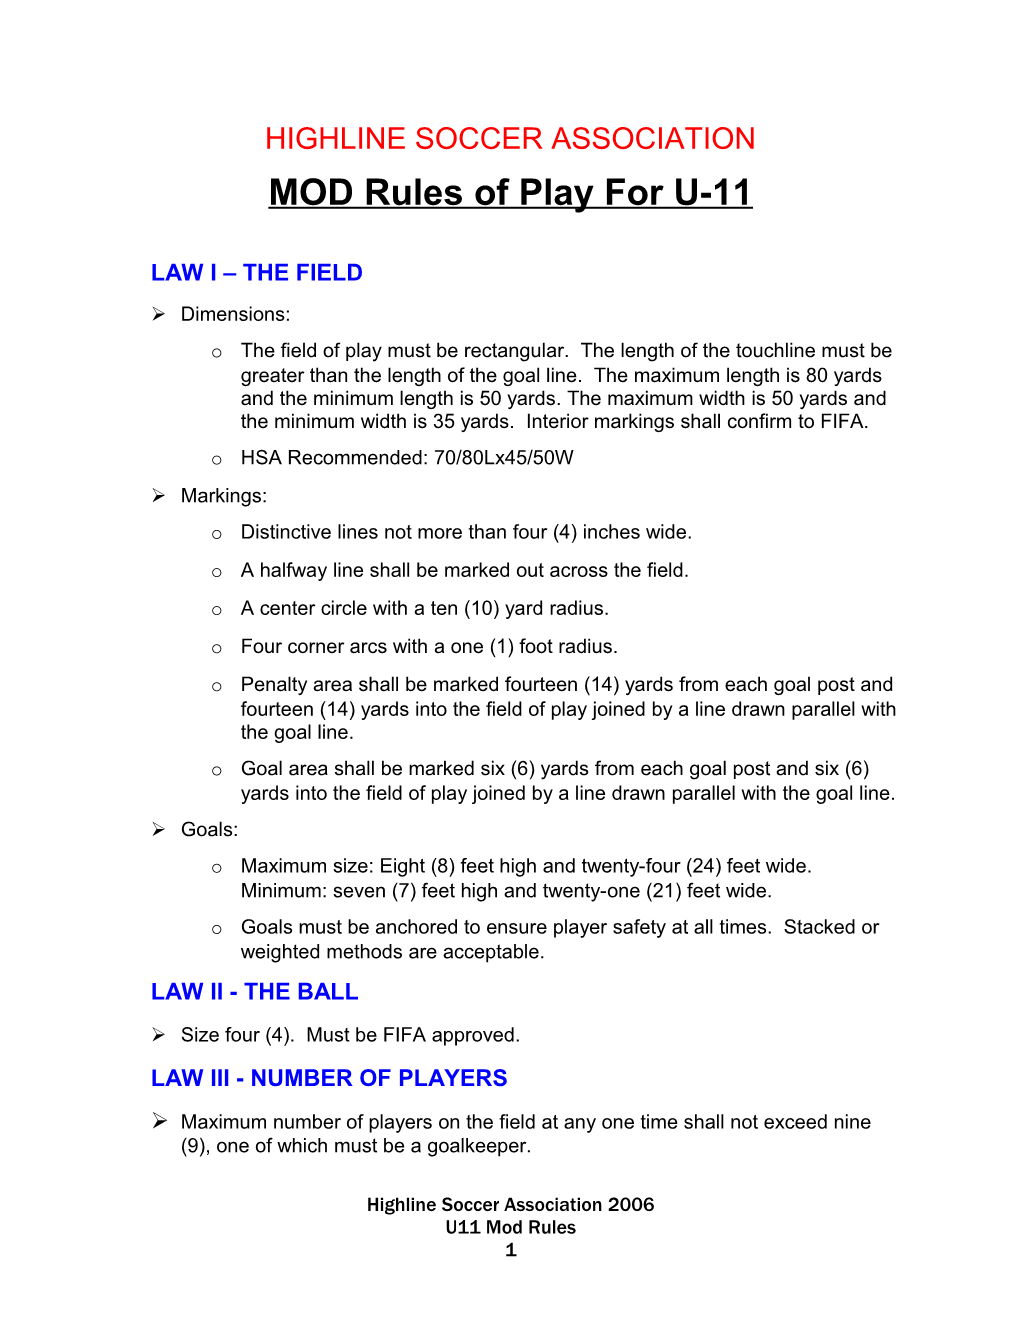 Mod Rules of Play for U-9